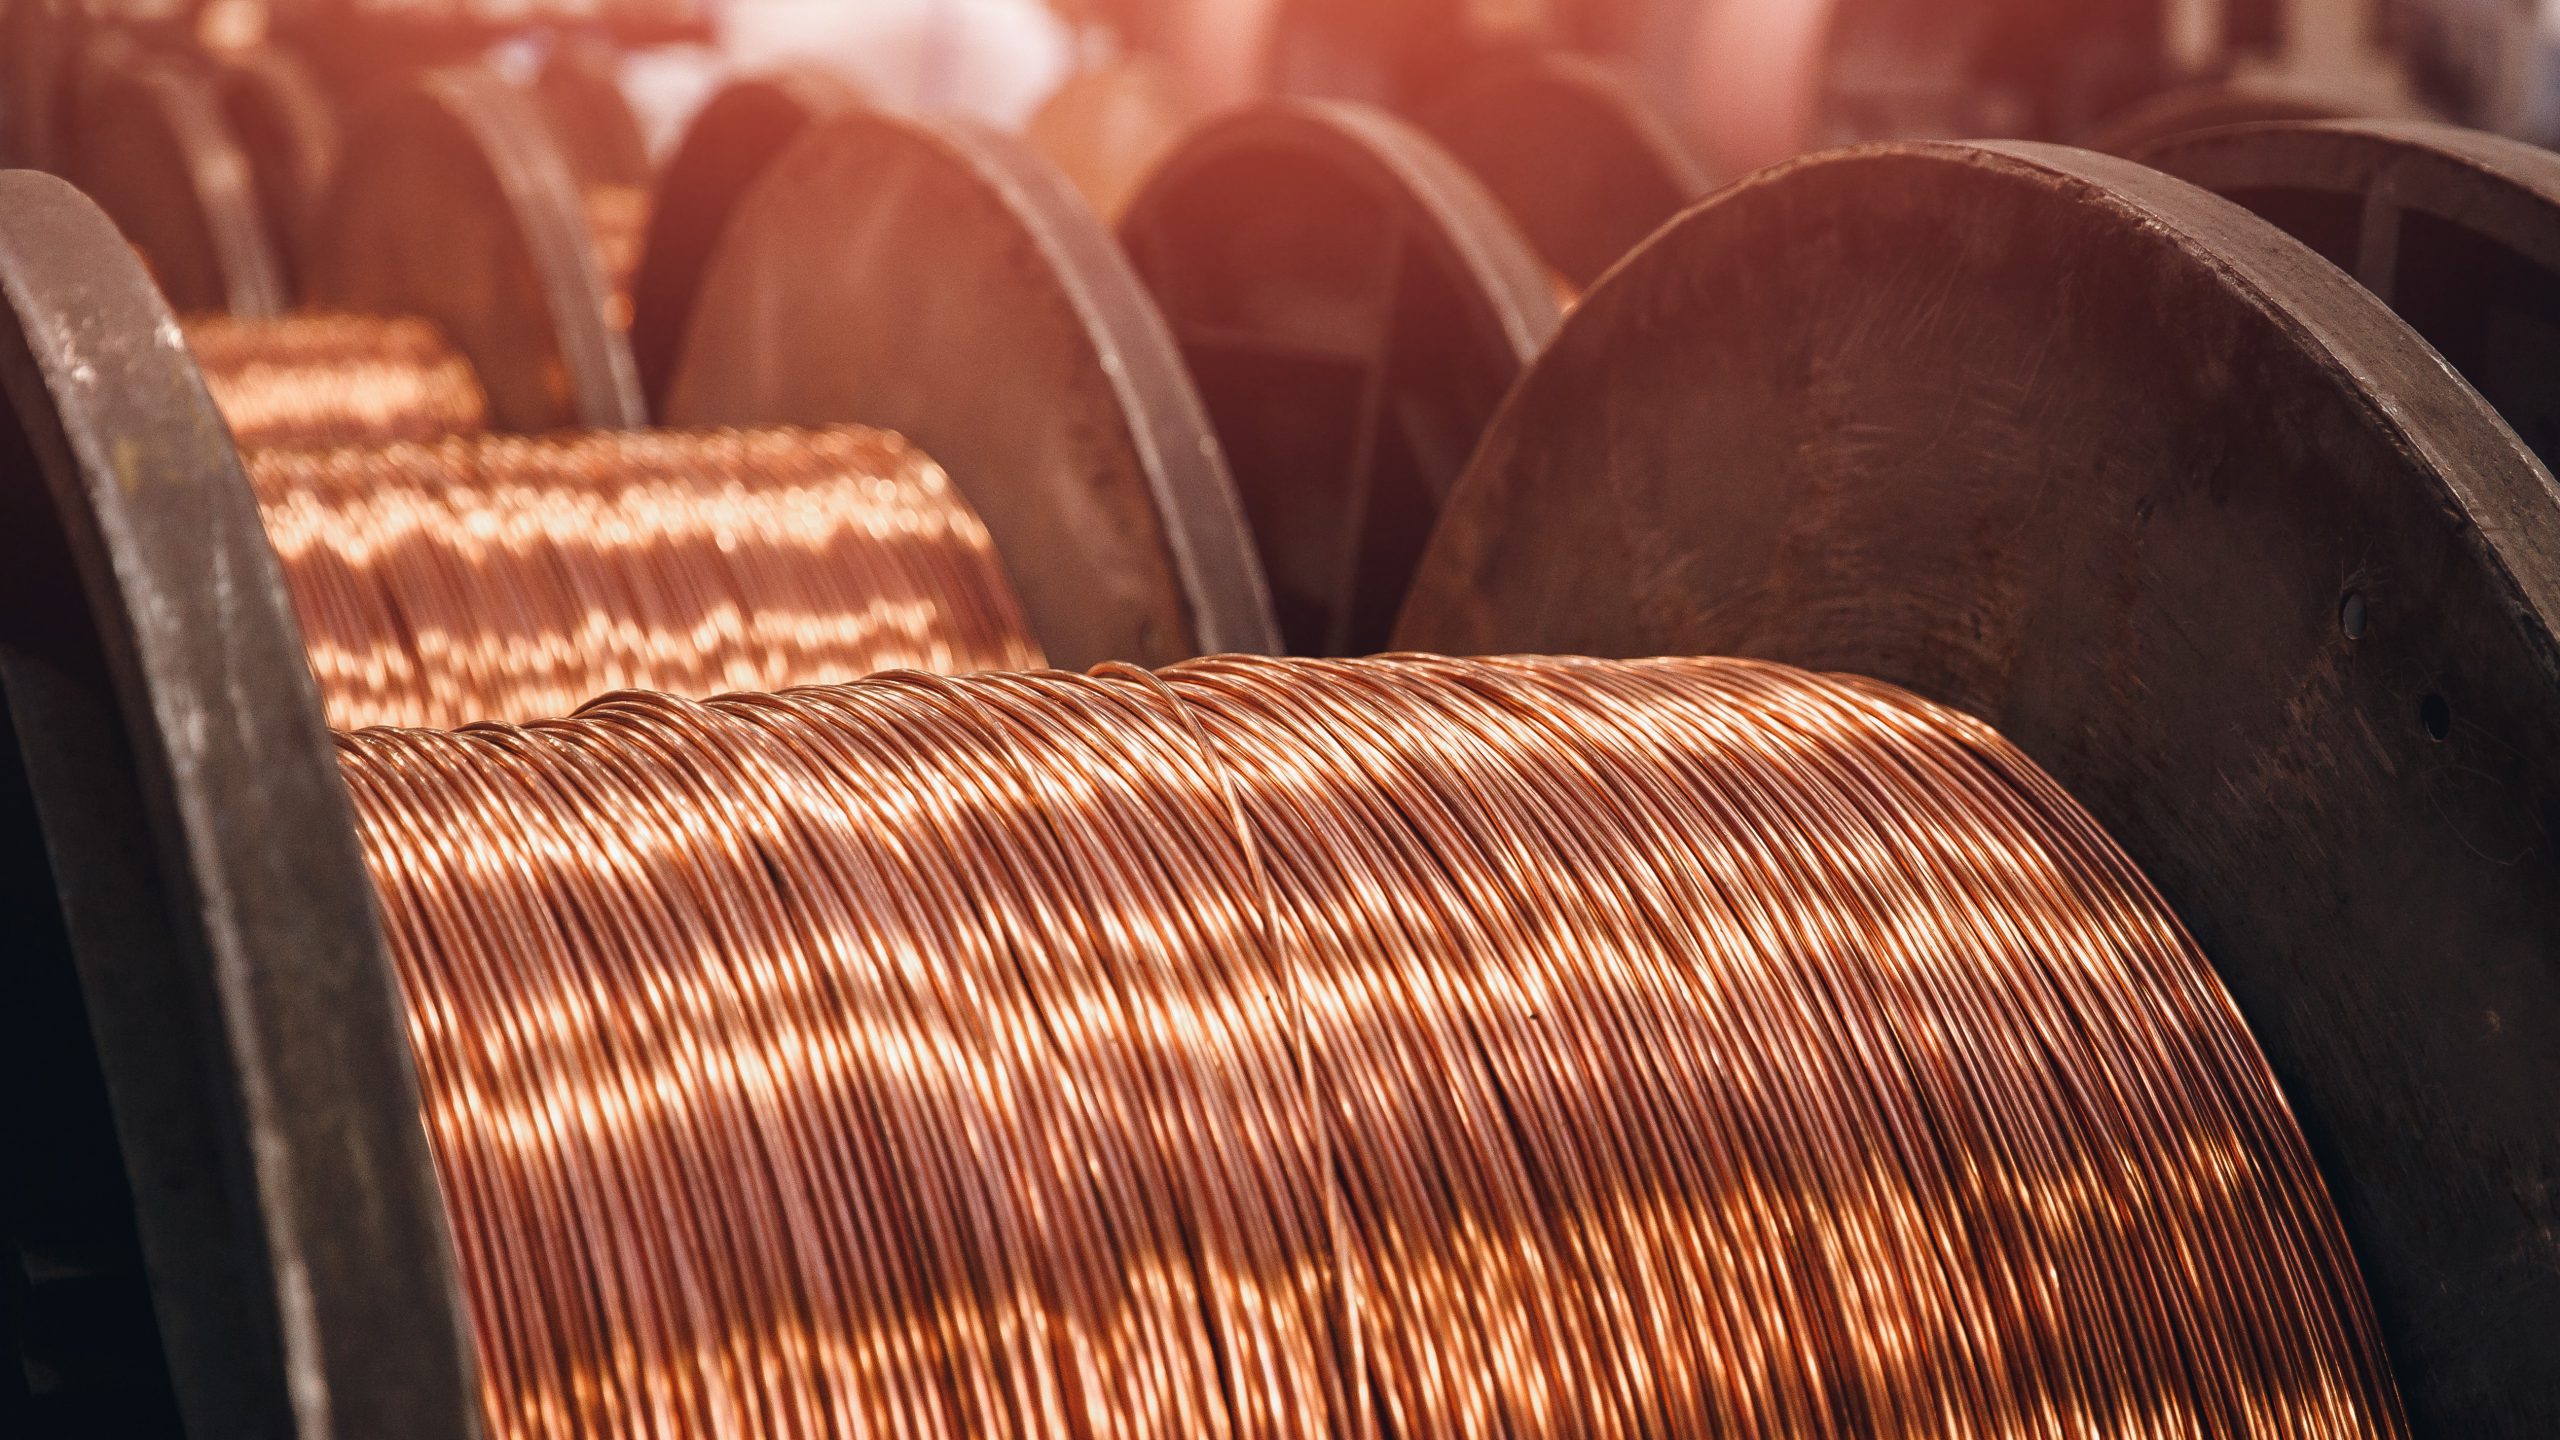 New capacity needed to meet rapid copper demand growth